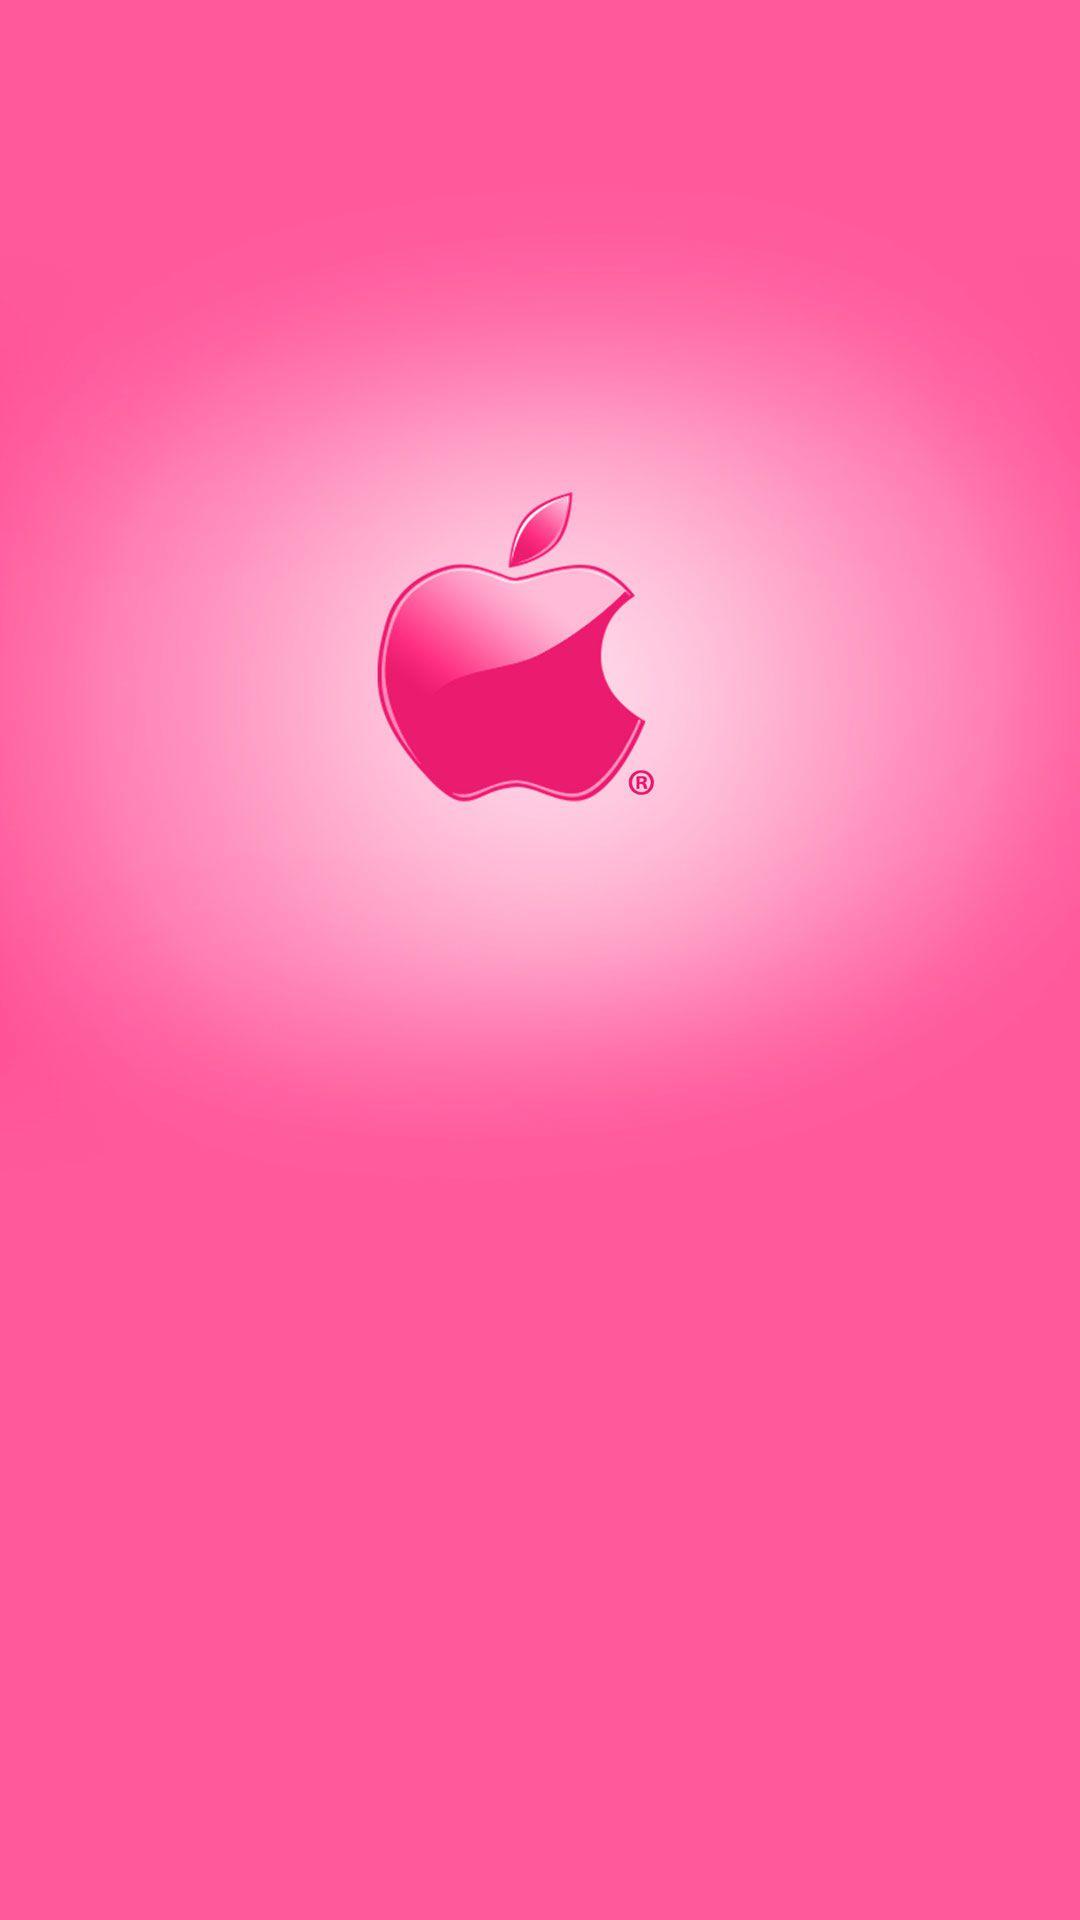 Cute pink Apple. Apples in Pink and Red!. Apples